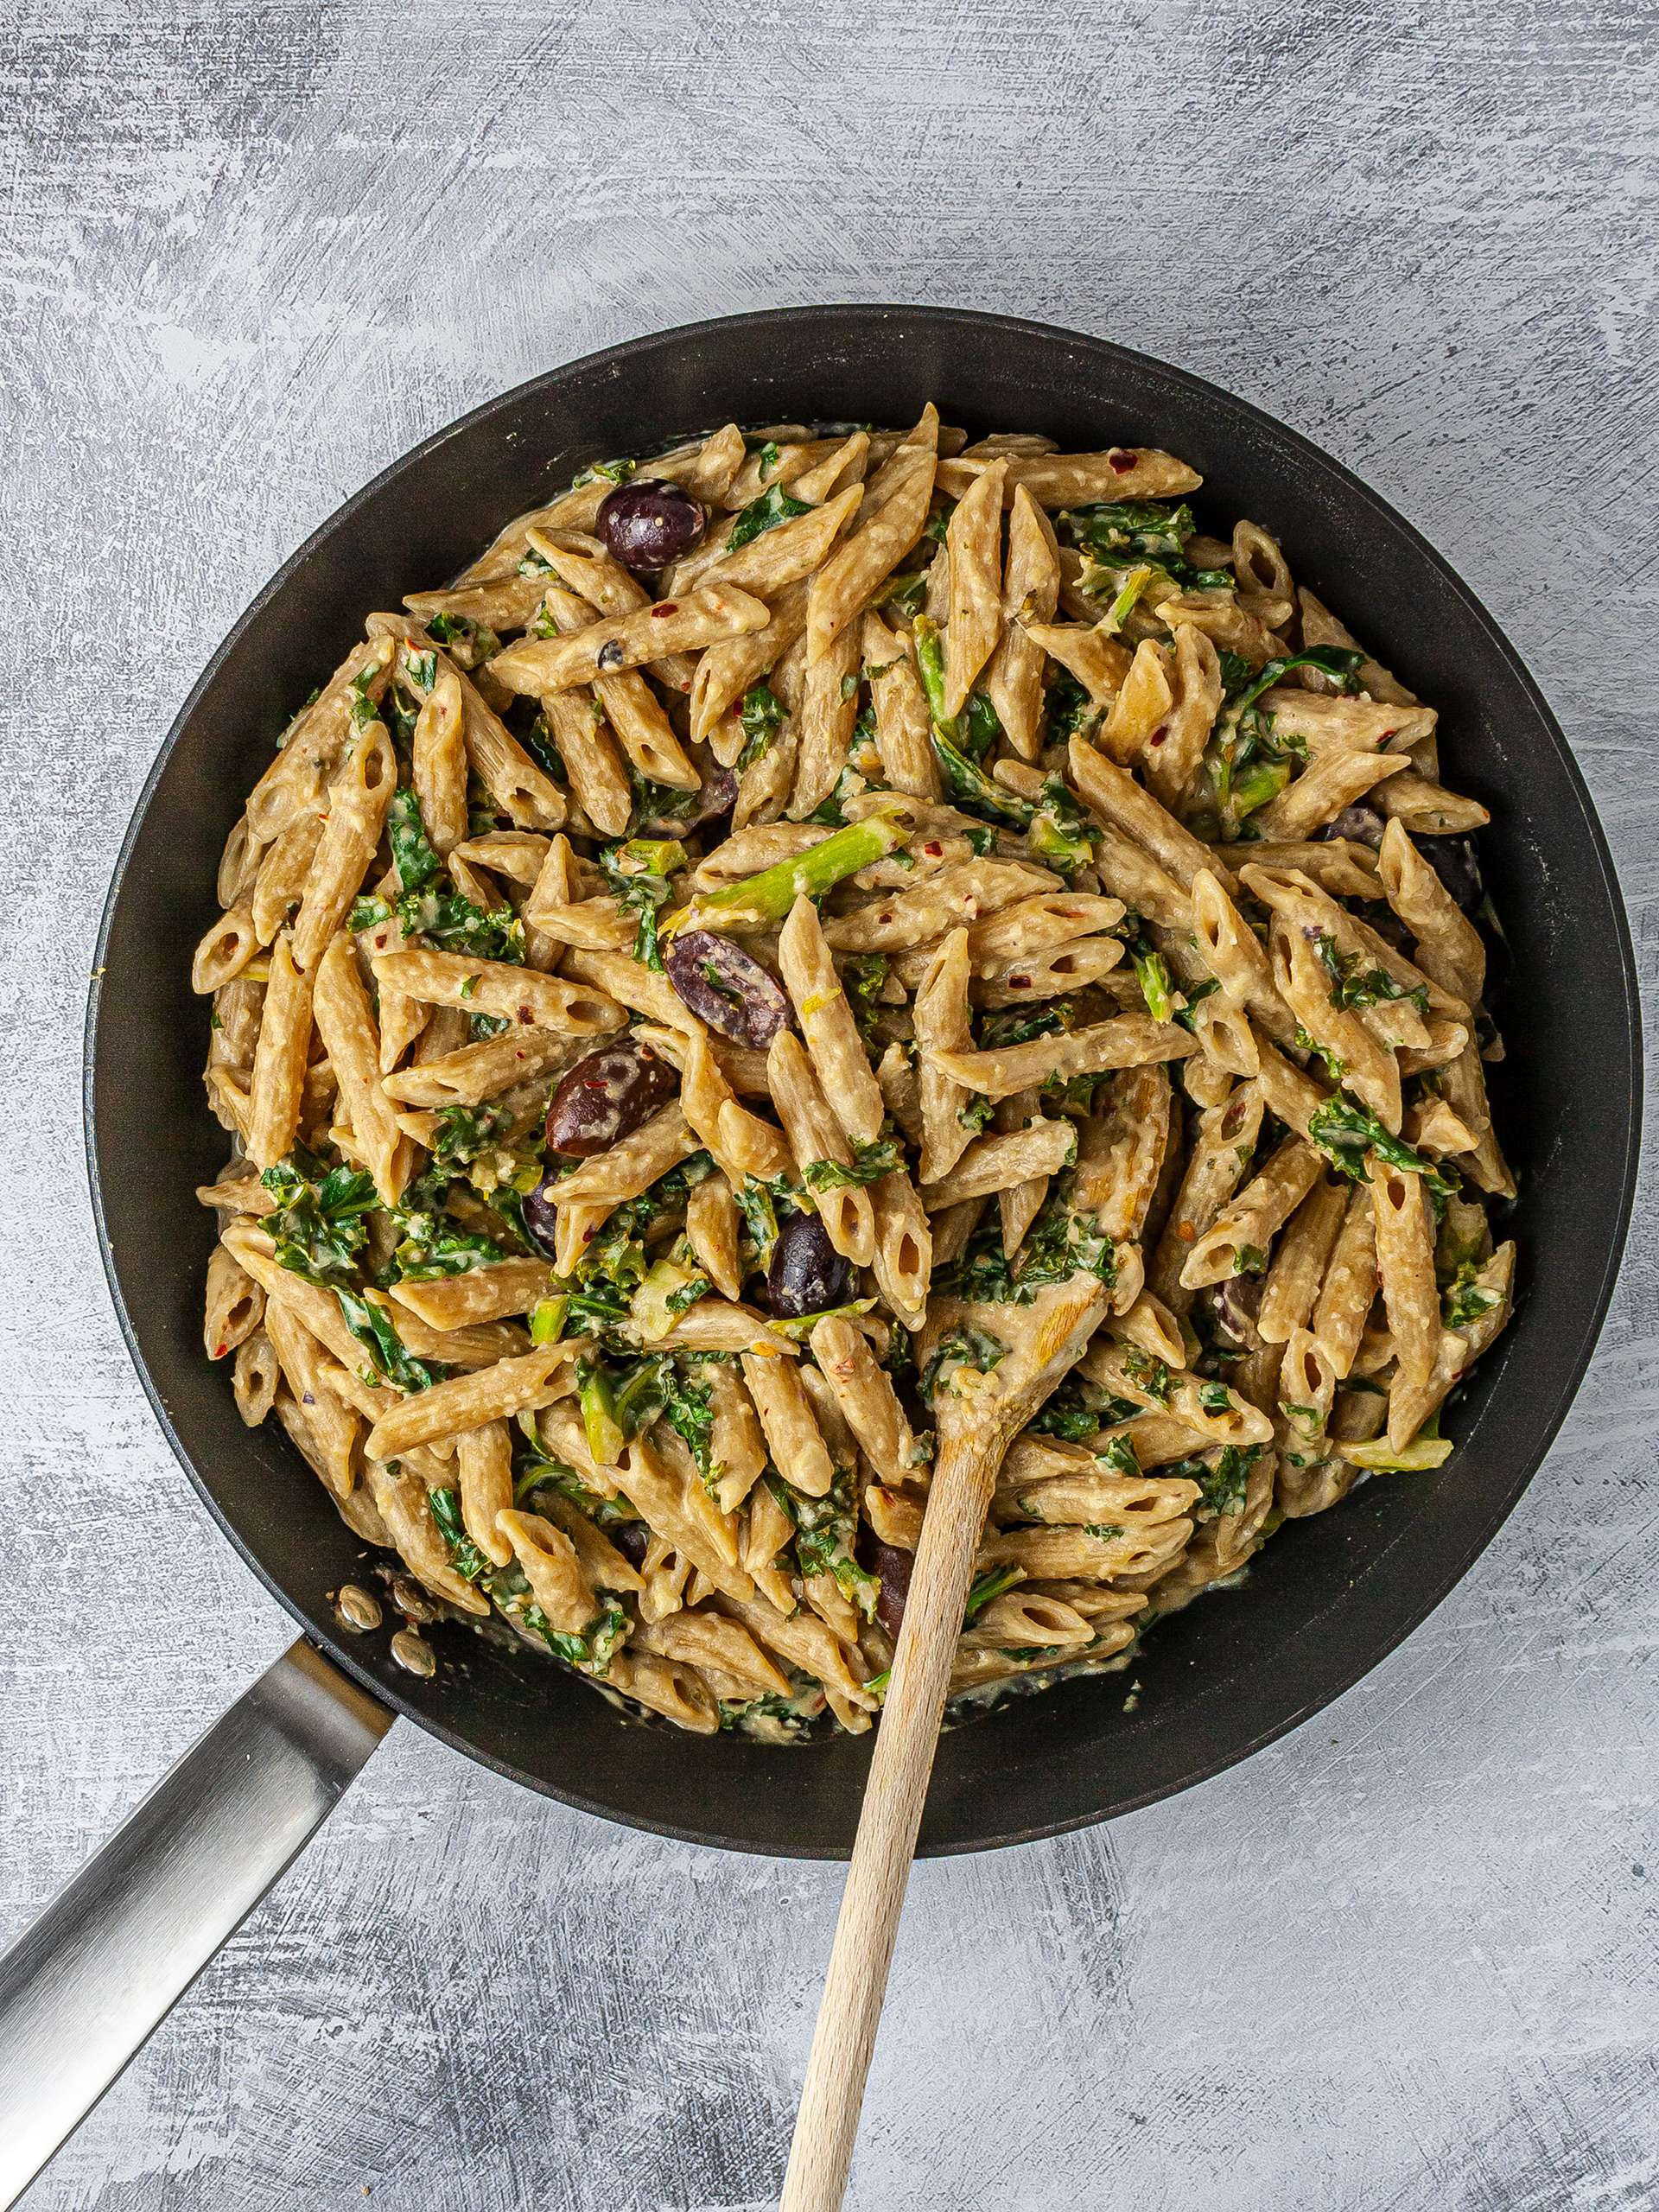 Wholemeal pasta with hummus sauce in a pan.